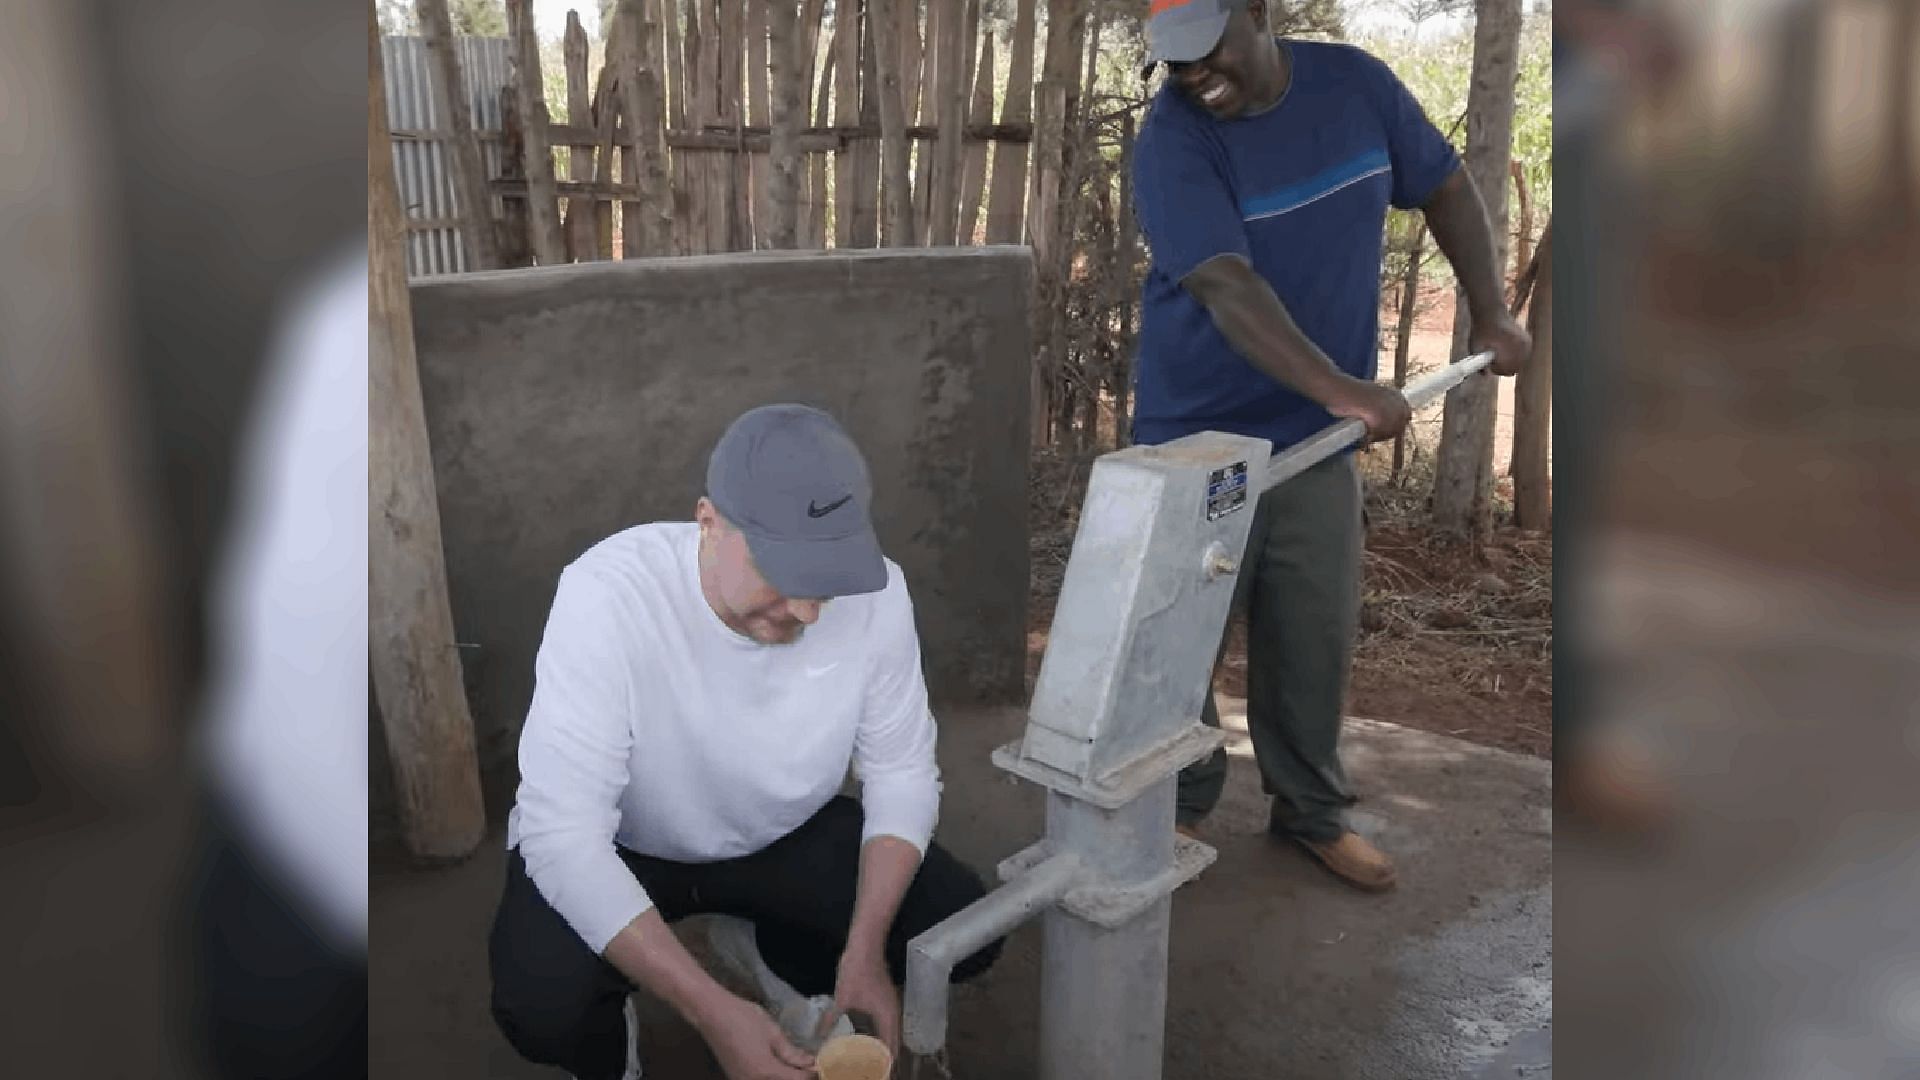 James drank water drawn from the well using a spigot. (Image via MrBeast/YouTube)